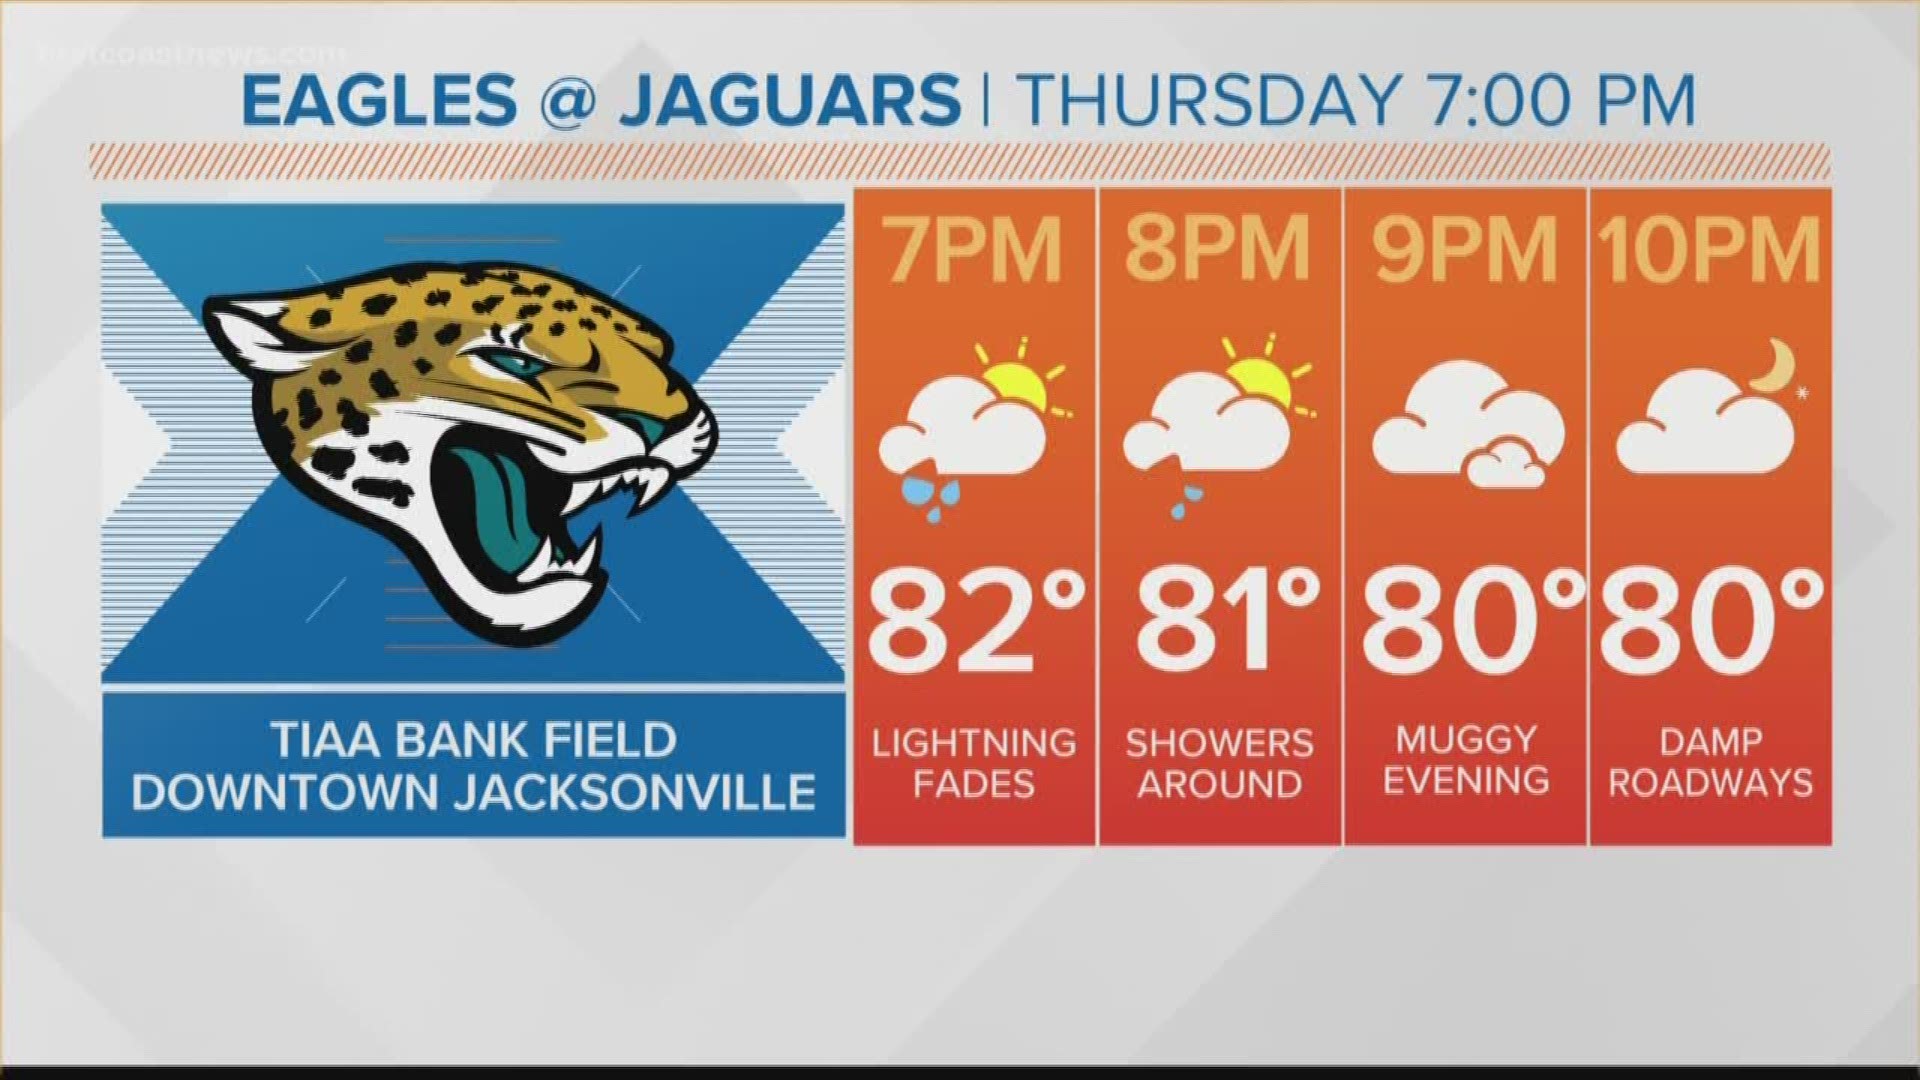 Jaguars game day, weather and traffic updates.